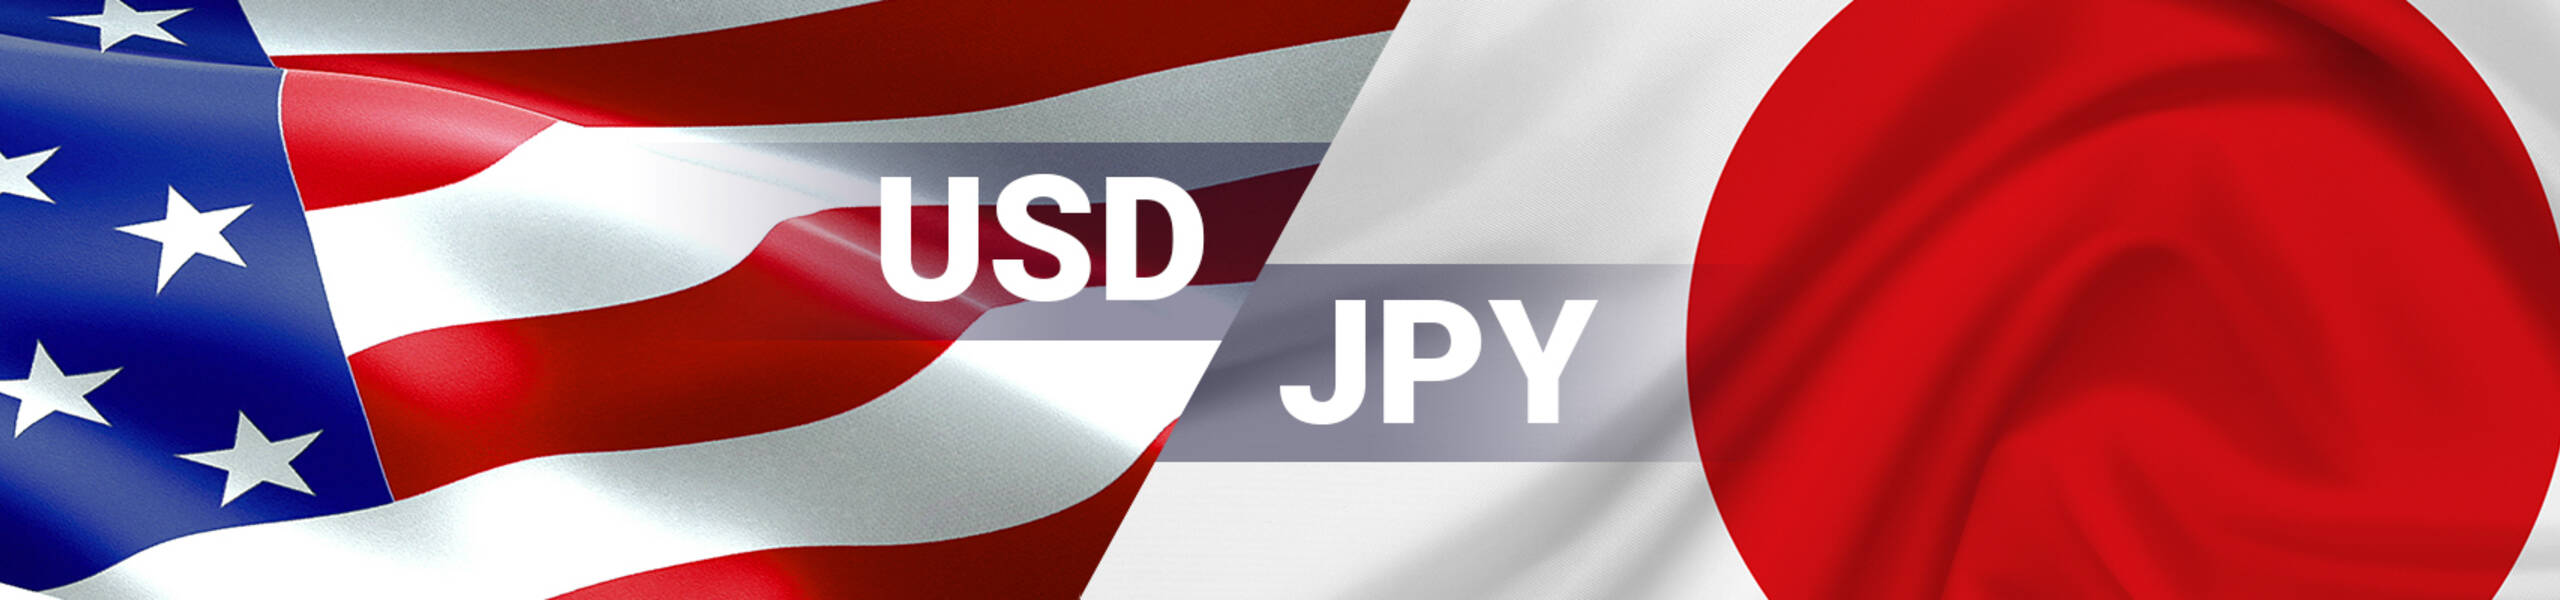 USD/JPY Dailyレポート 2017/07/25